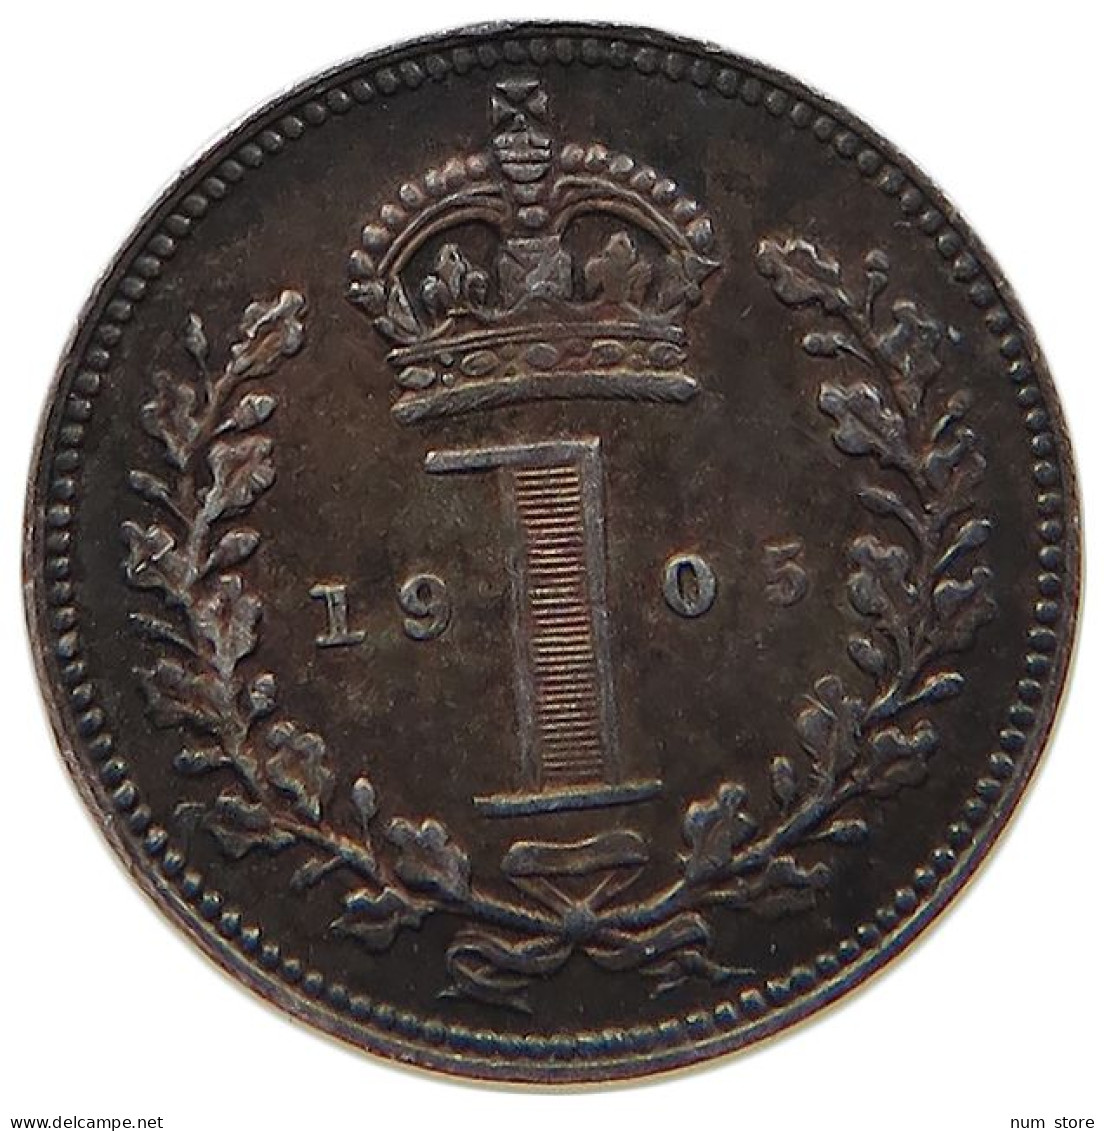 GREAT BRITAIN PENNY 1905 EDWARD VII., 1901 - 1910 MAUNDY #MA 104129 - D. 1 Penny